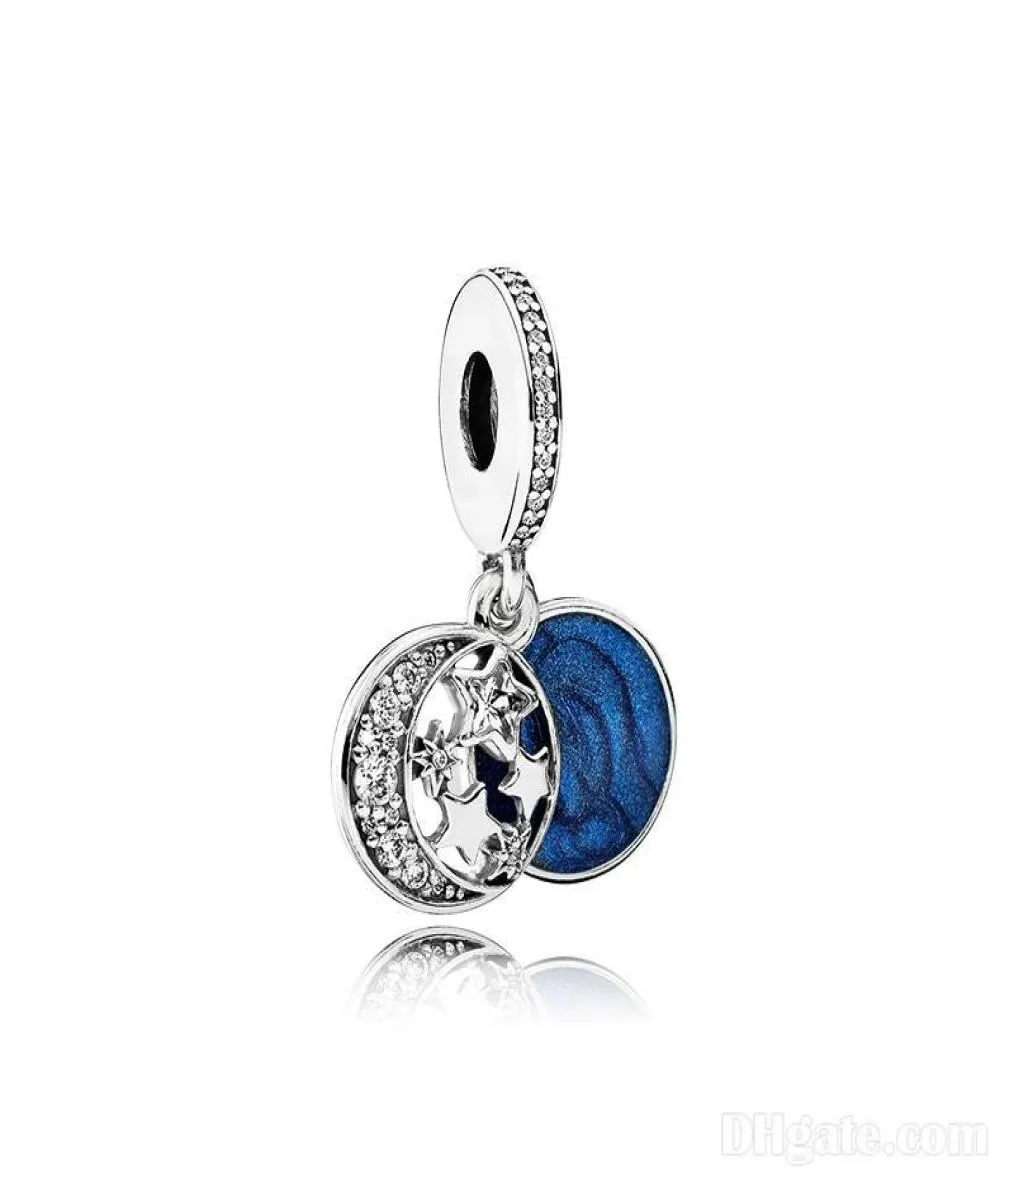 925 Sterling Silver Blue Emamel Star and Moon Pendant Charms Original Box For European Bead Charms Armband Halsbandsmycken Making2086463